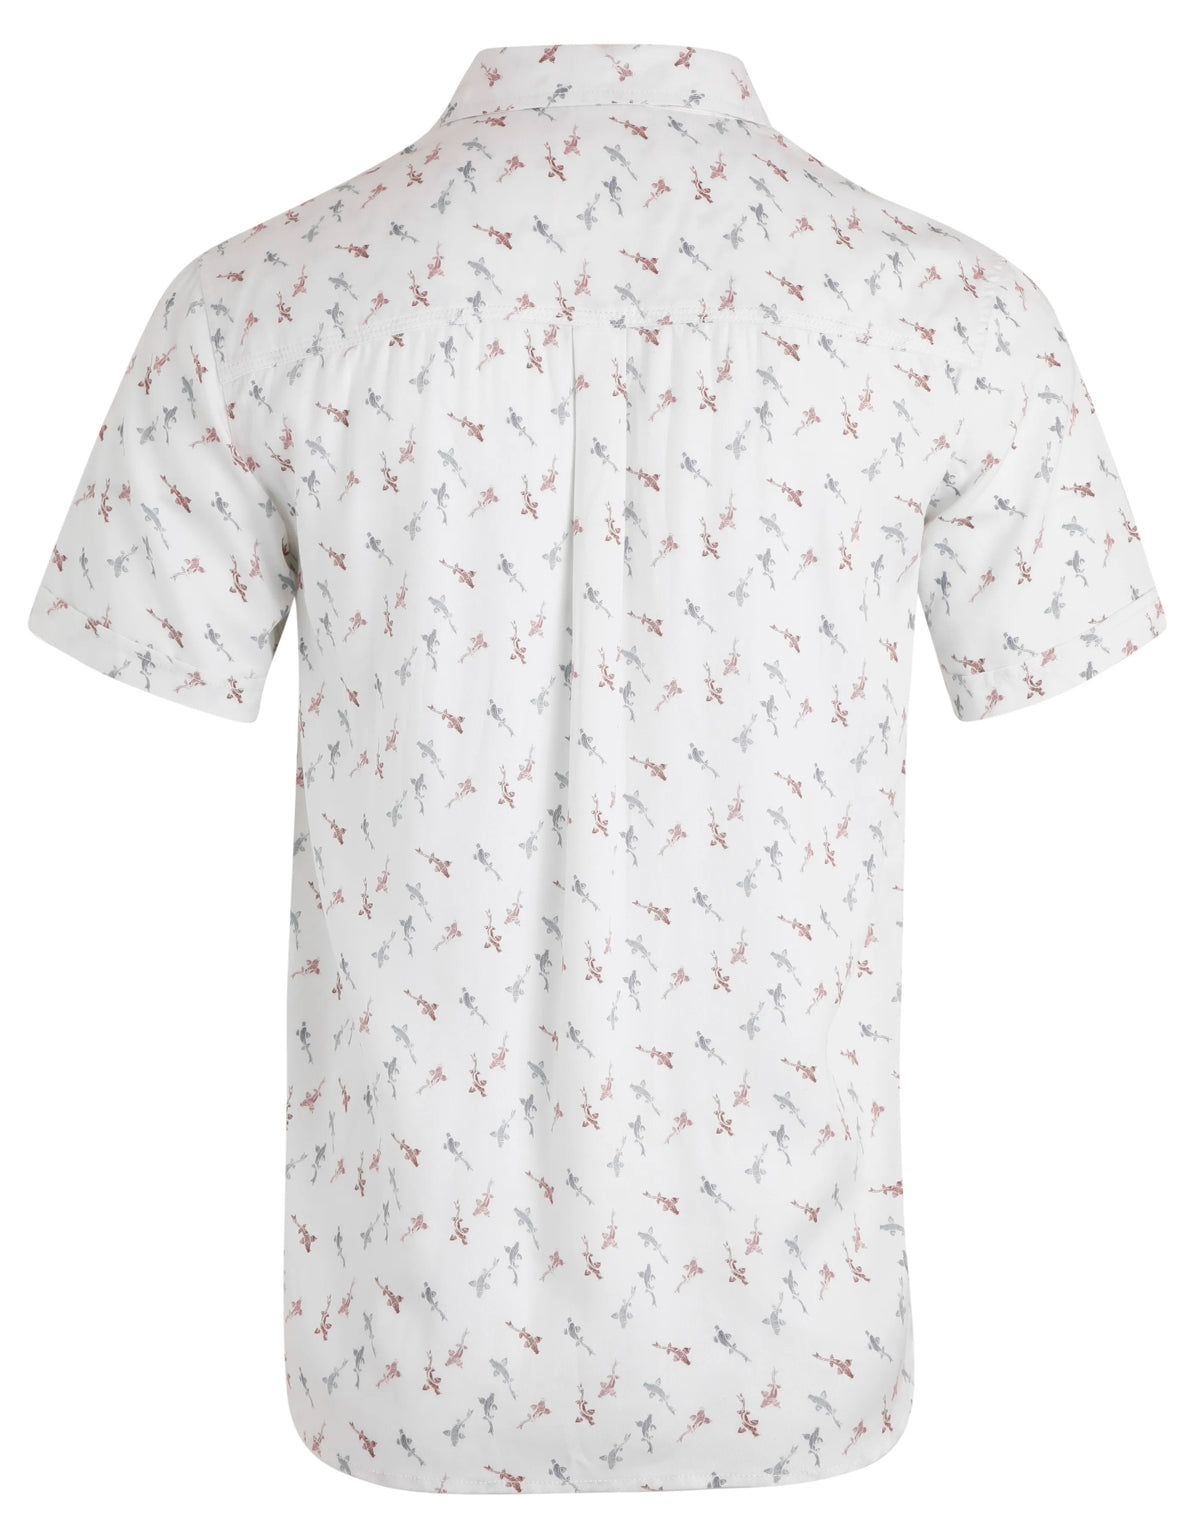 A fish print men's shirt from Weird Fish, the Keilor shirt in white has short sleeves, button through front and is made from a Tencel fabric.